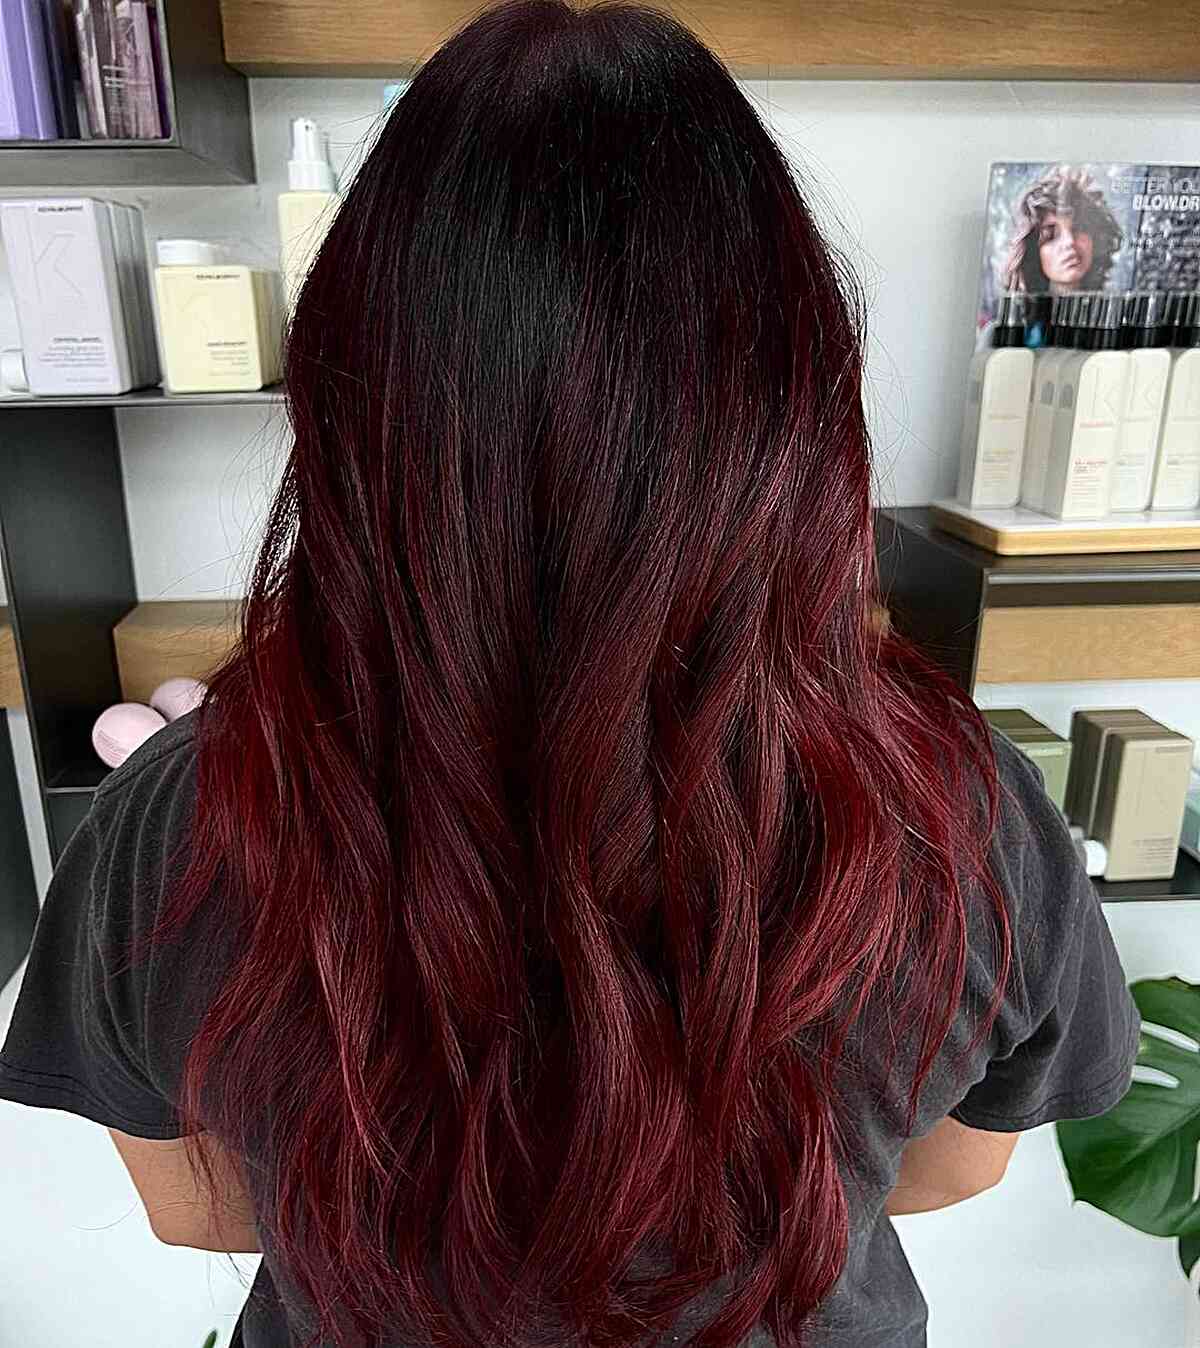 melted maroon burgundy balayage hair color